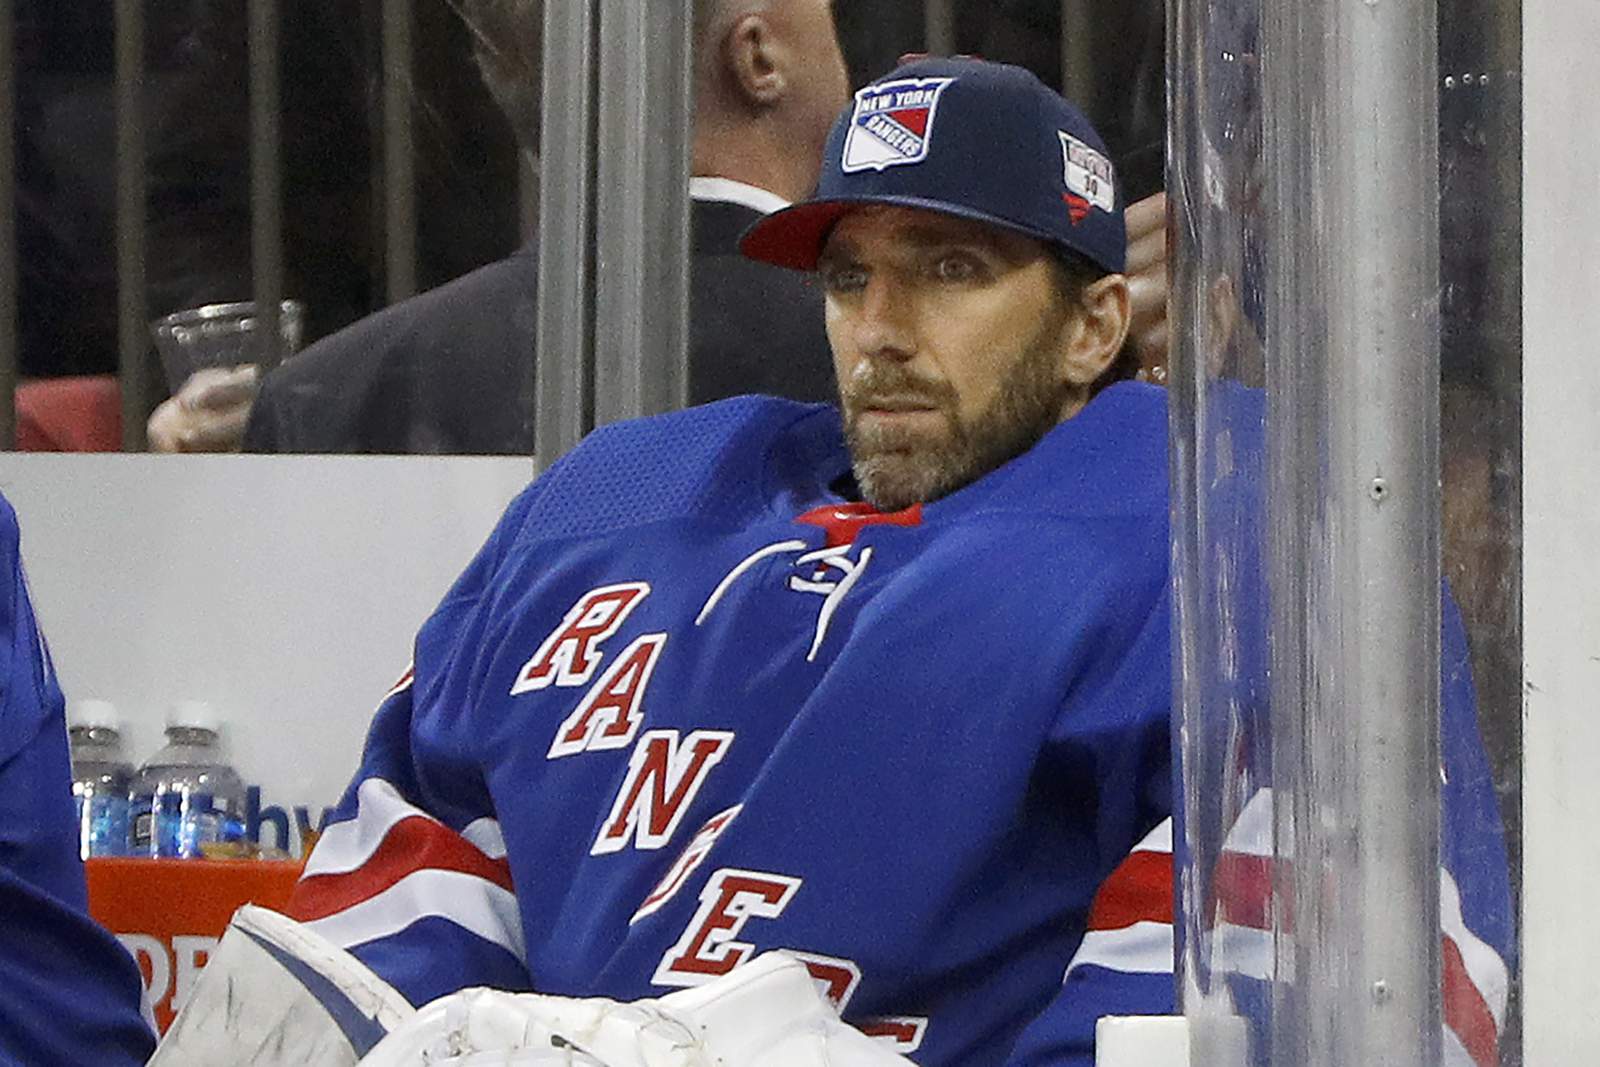 Lundqvist won't play this season after heart inflammation